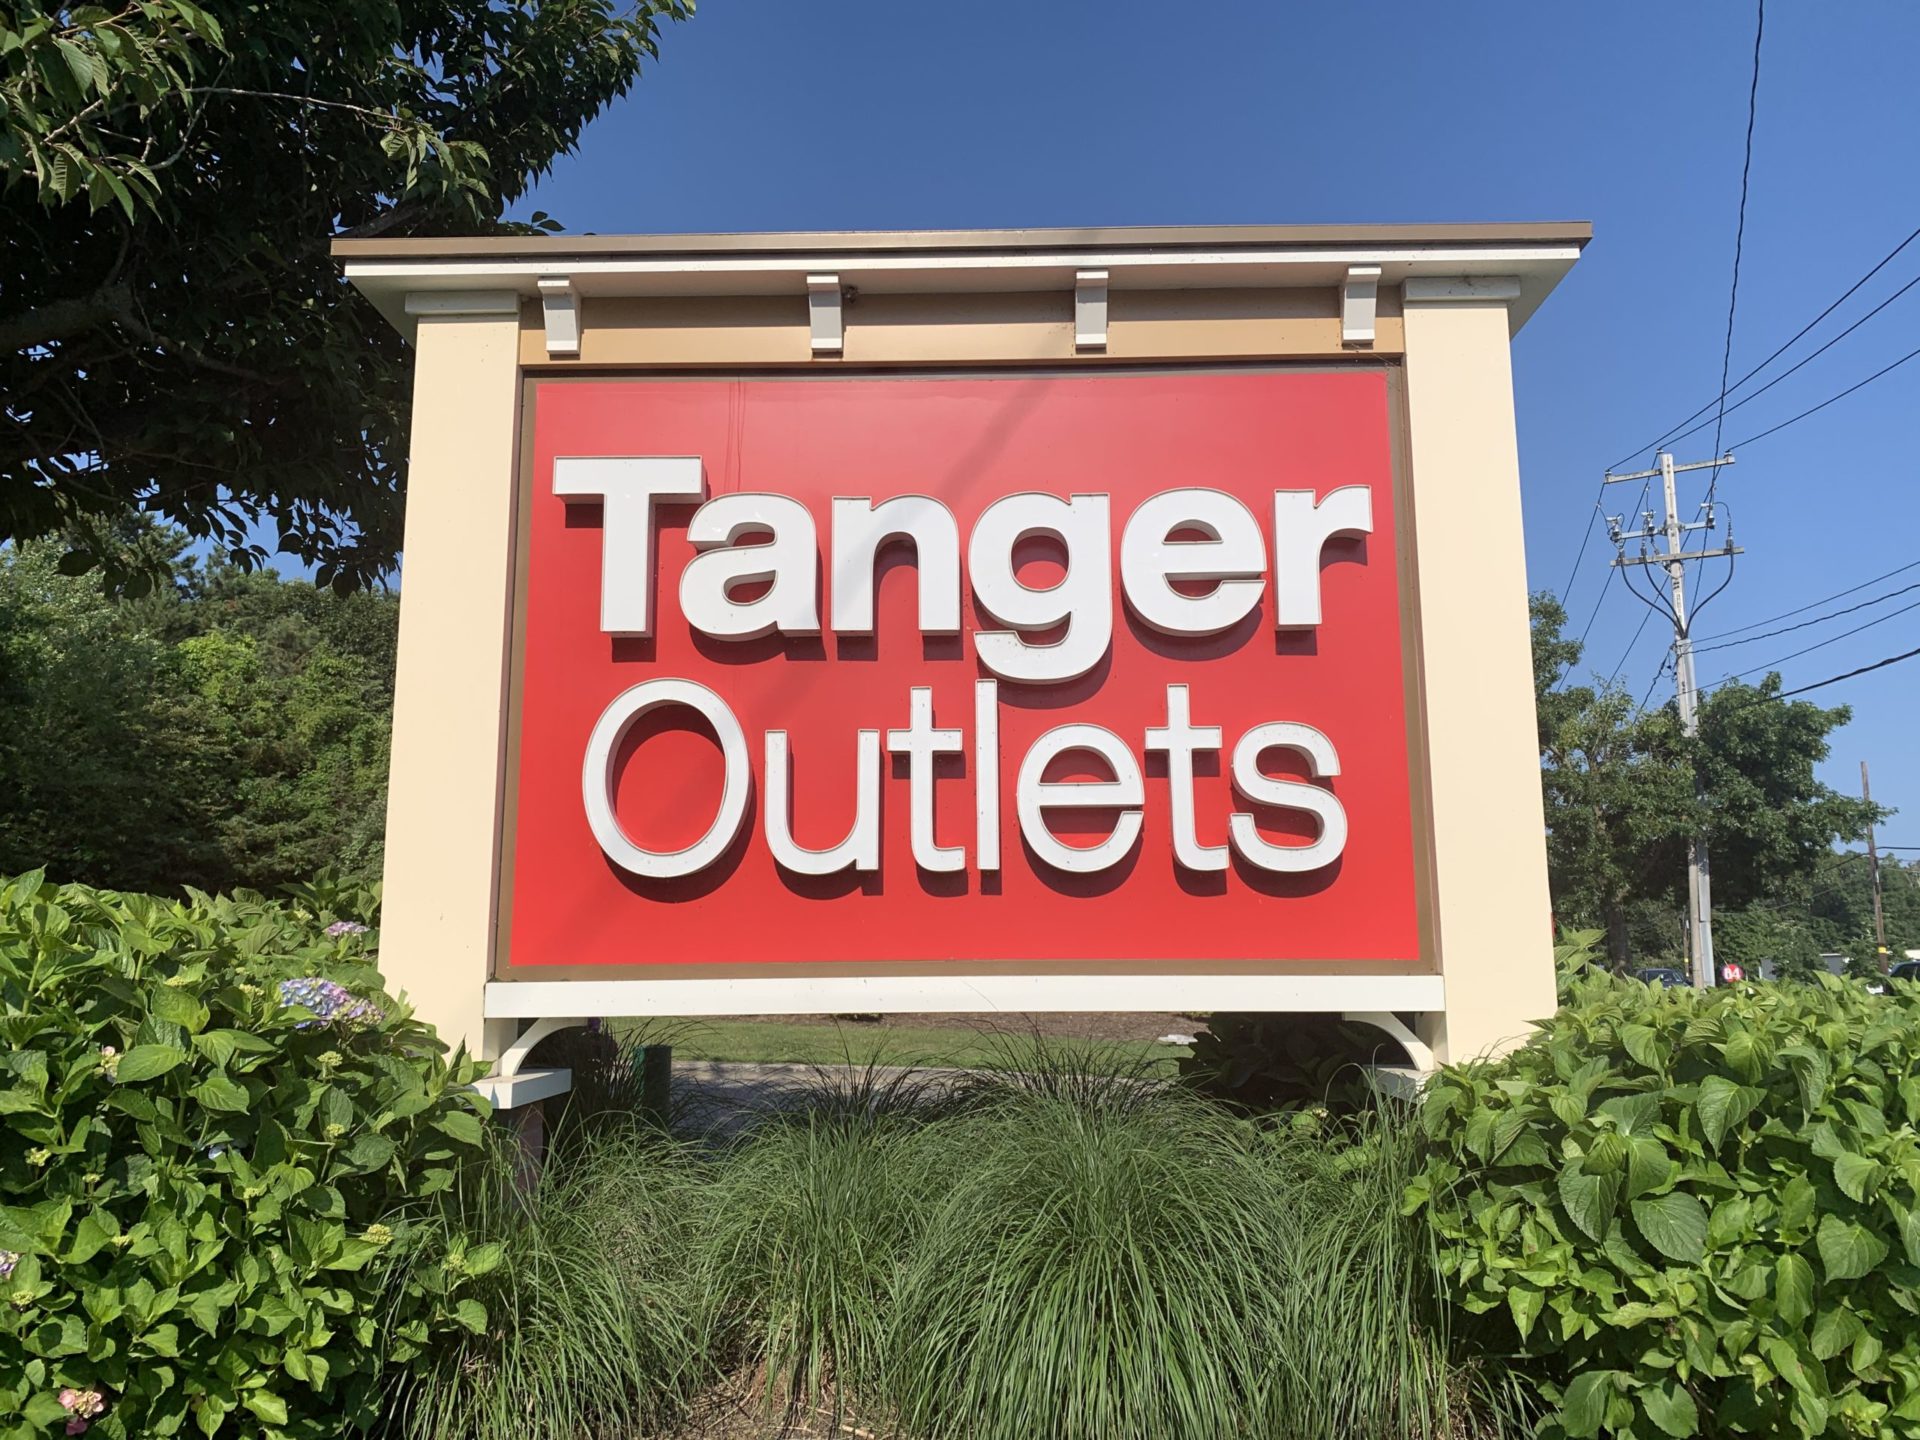 Back to Business at Tanger in Riverhead – Dan's Papers